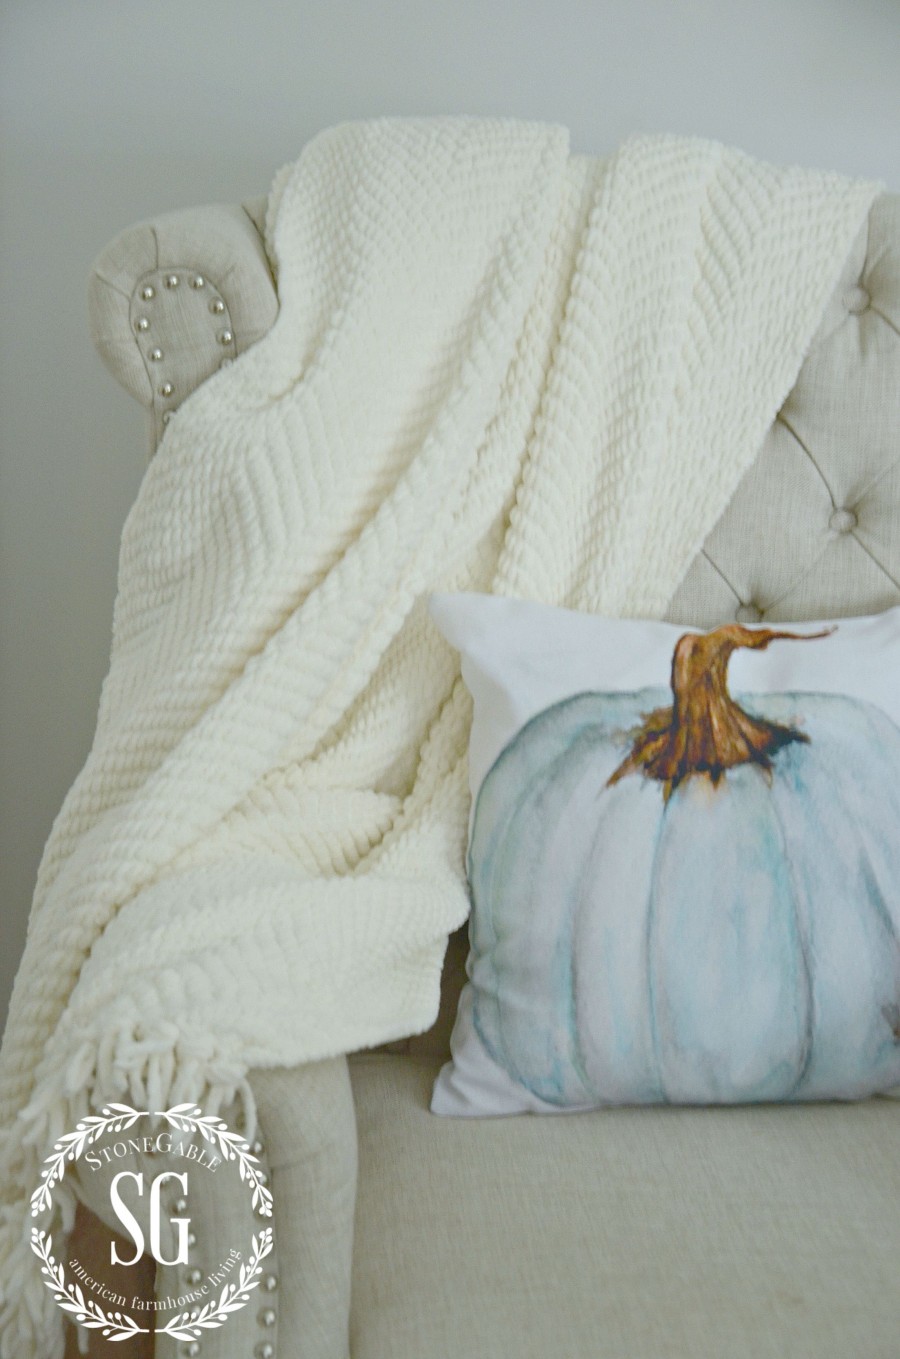 TIPS FOR A FABULOUS FALL GUEST ROOM- Easy ways to add a tad of the season to your geuest rooms-stonegableblog.com